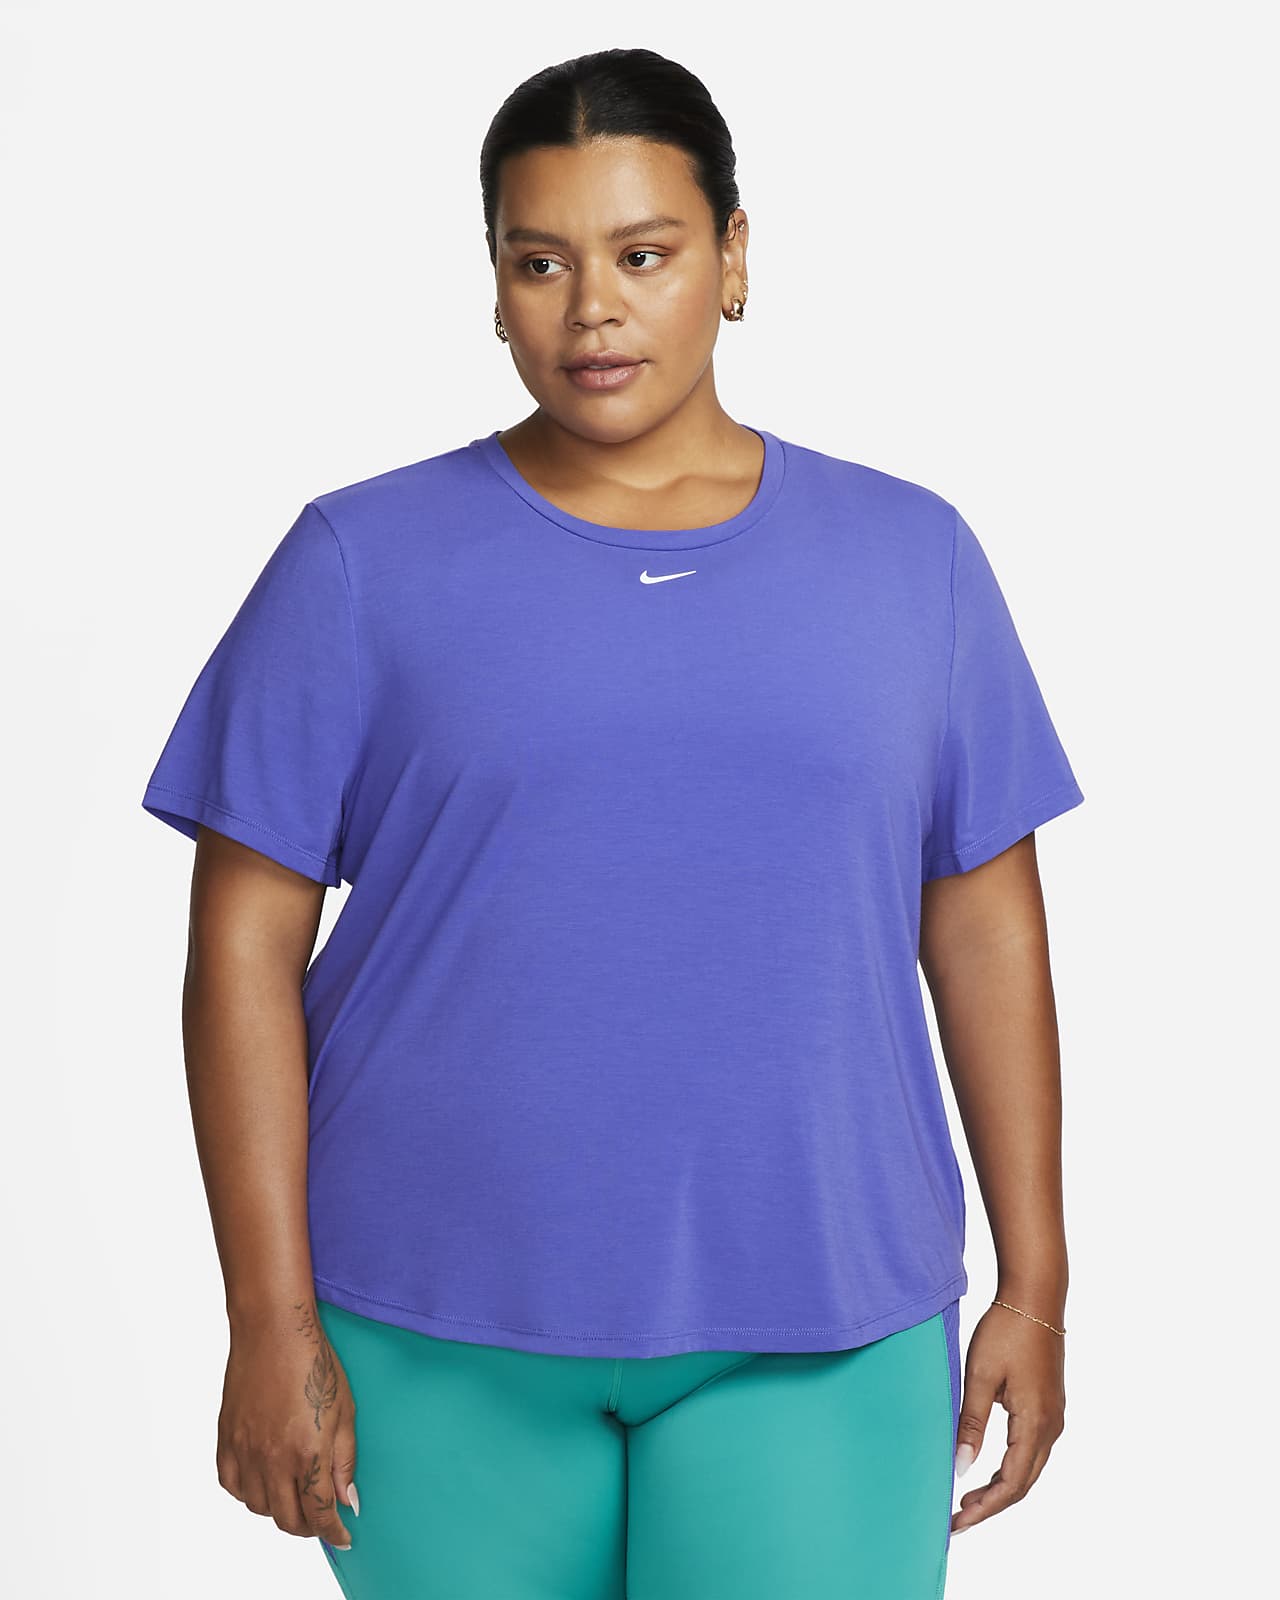 R Commotie Boos worden Nike Dri-FIT UV One Luxe Women's Standard Fit Short-Sleeve Top (Plus Size).  Nike.com